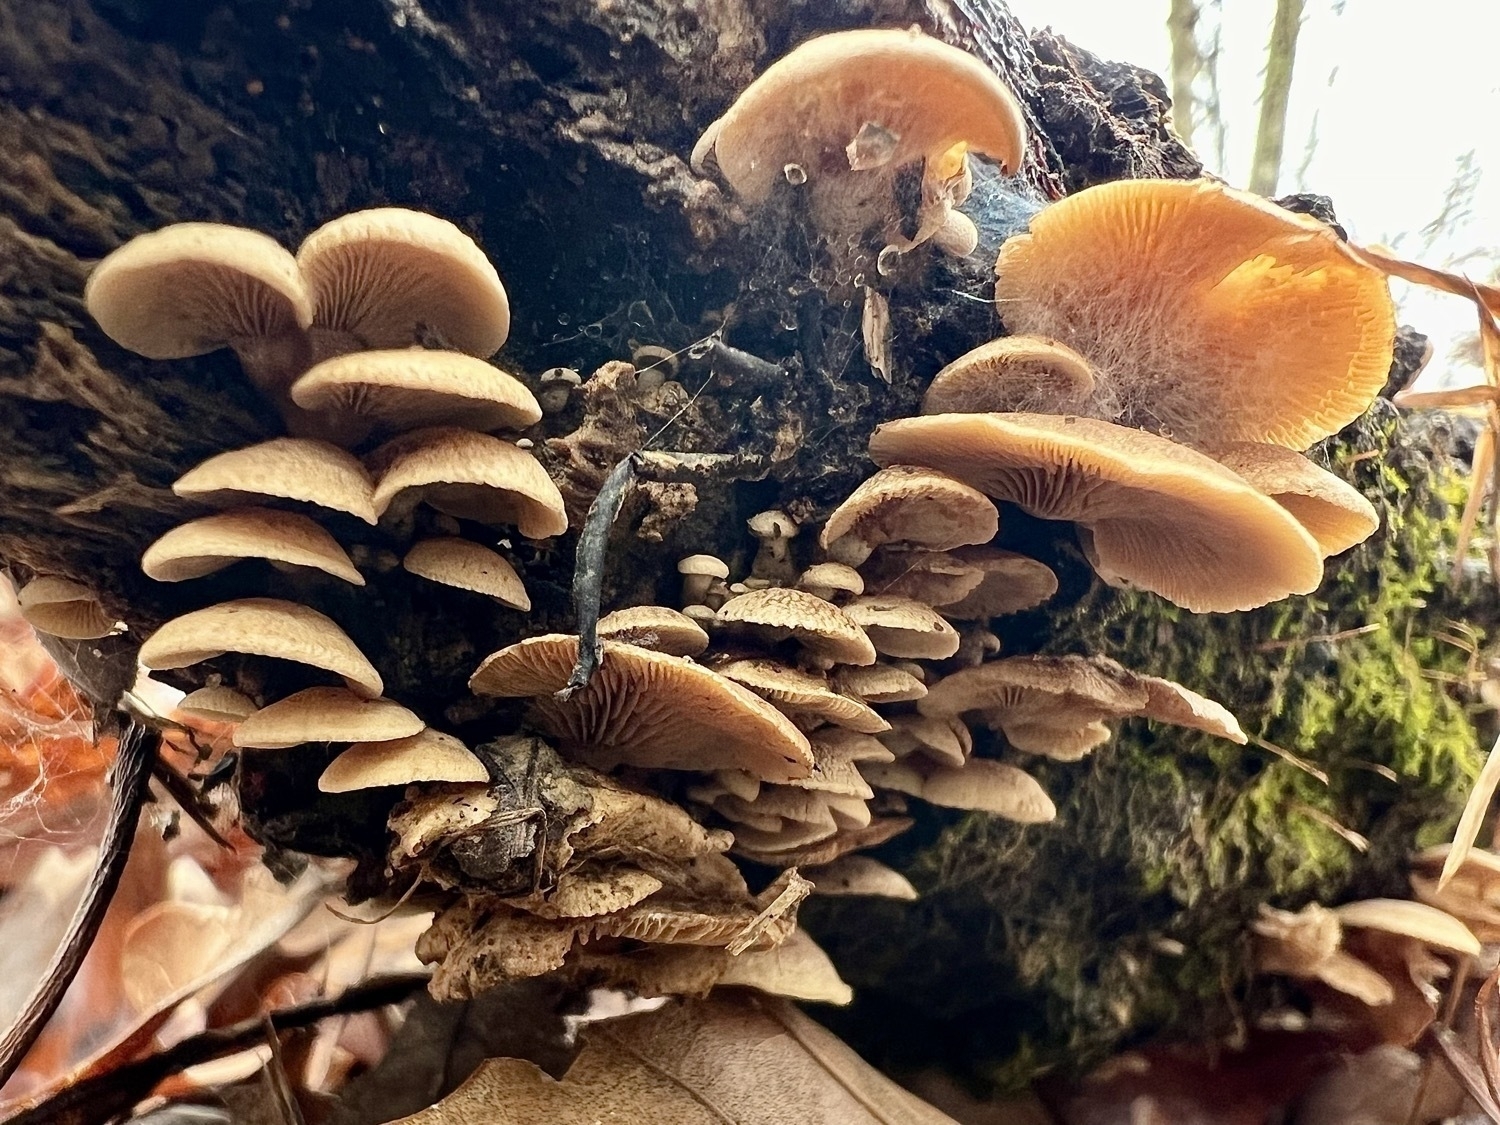 A bottom up view of a cluster of Orangish cream colored mushrooms growing from a fallen tree. The mushrooms are in the shape of a Half circle and are irregular in texture and variations of color. As the photo is taken from below the underside of the mushrooms with gills or ridges are visible. In the background green moss, lichen and more mushrooms a